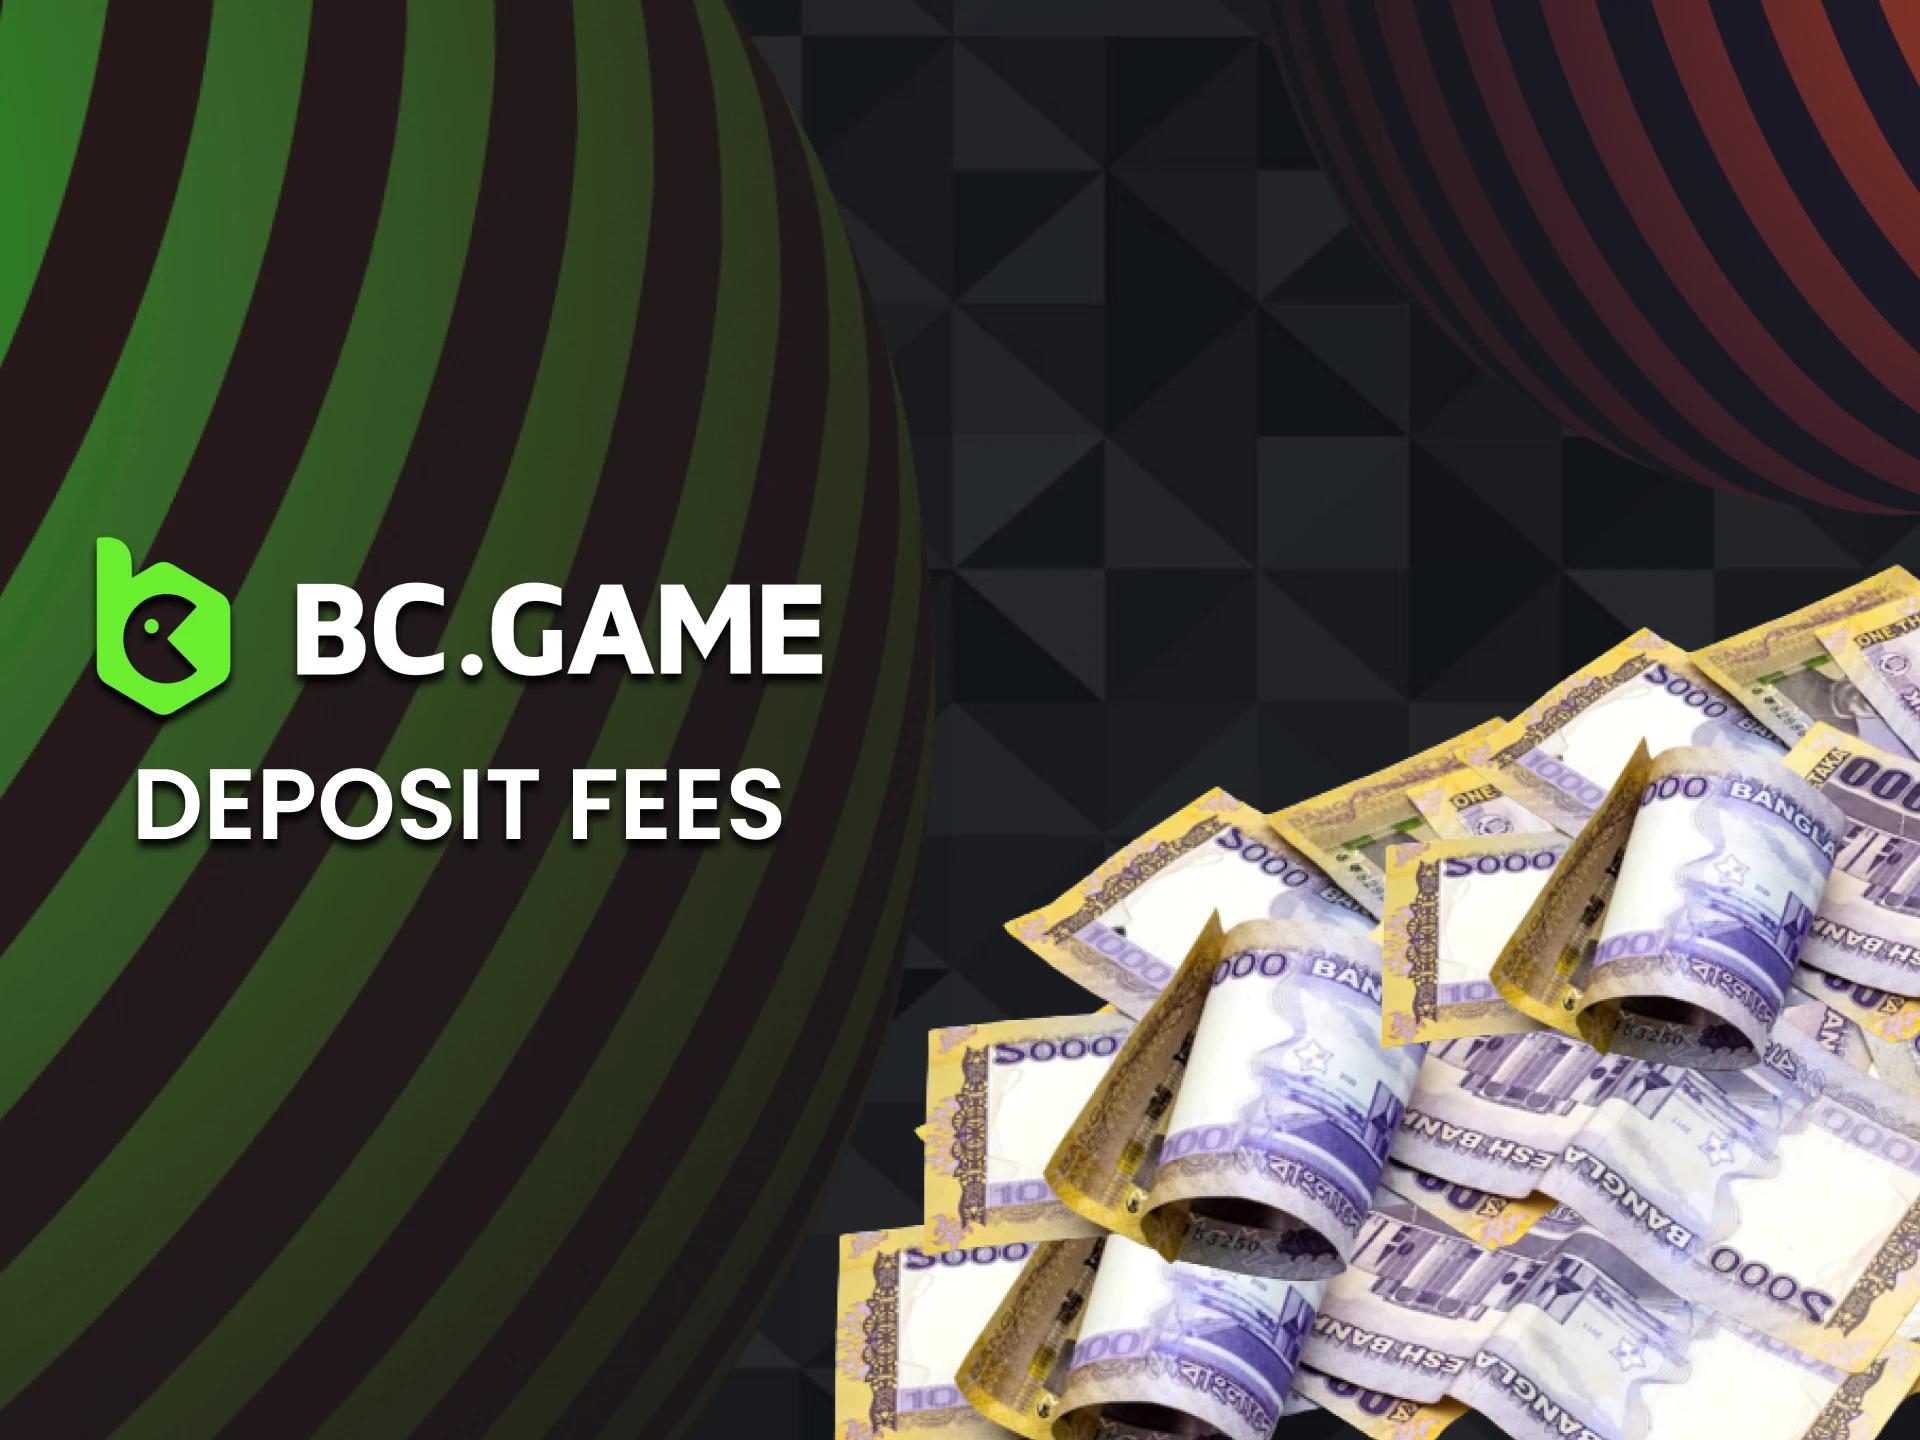 BC Game doesn't charge a commission on deposits.